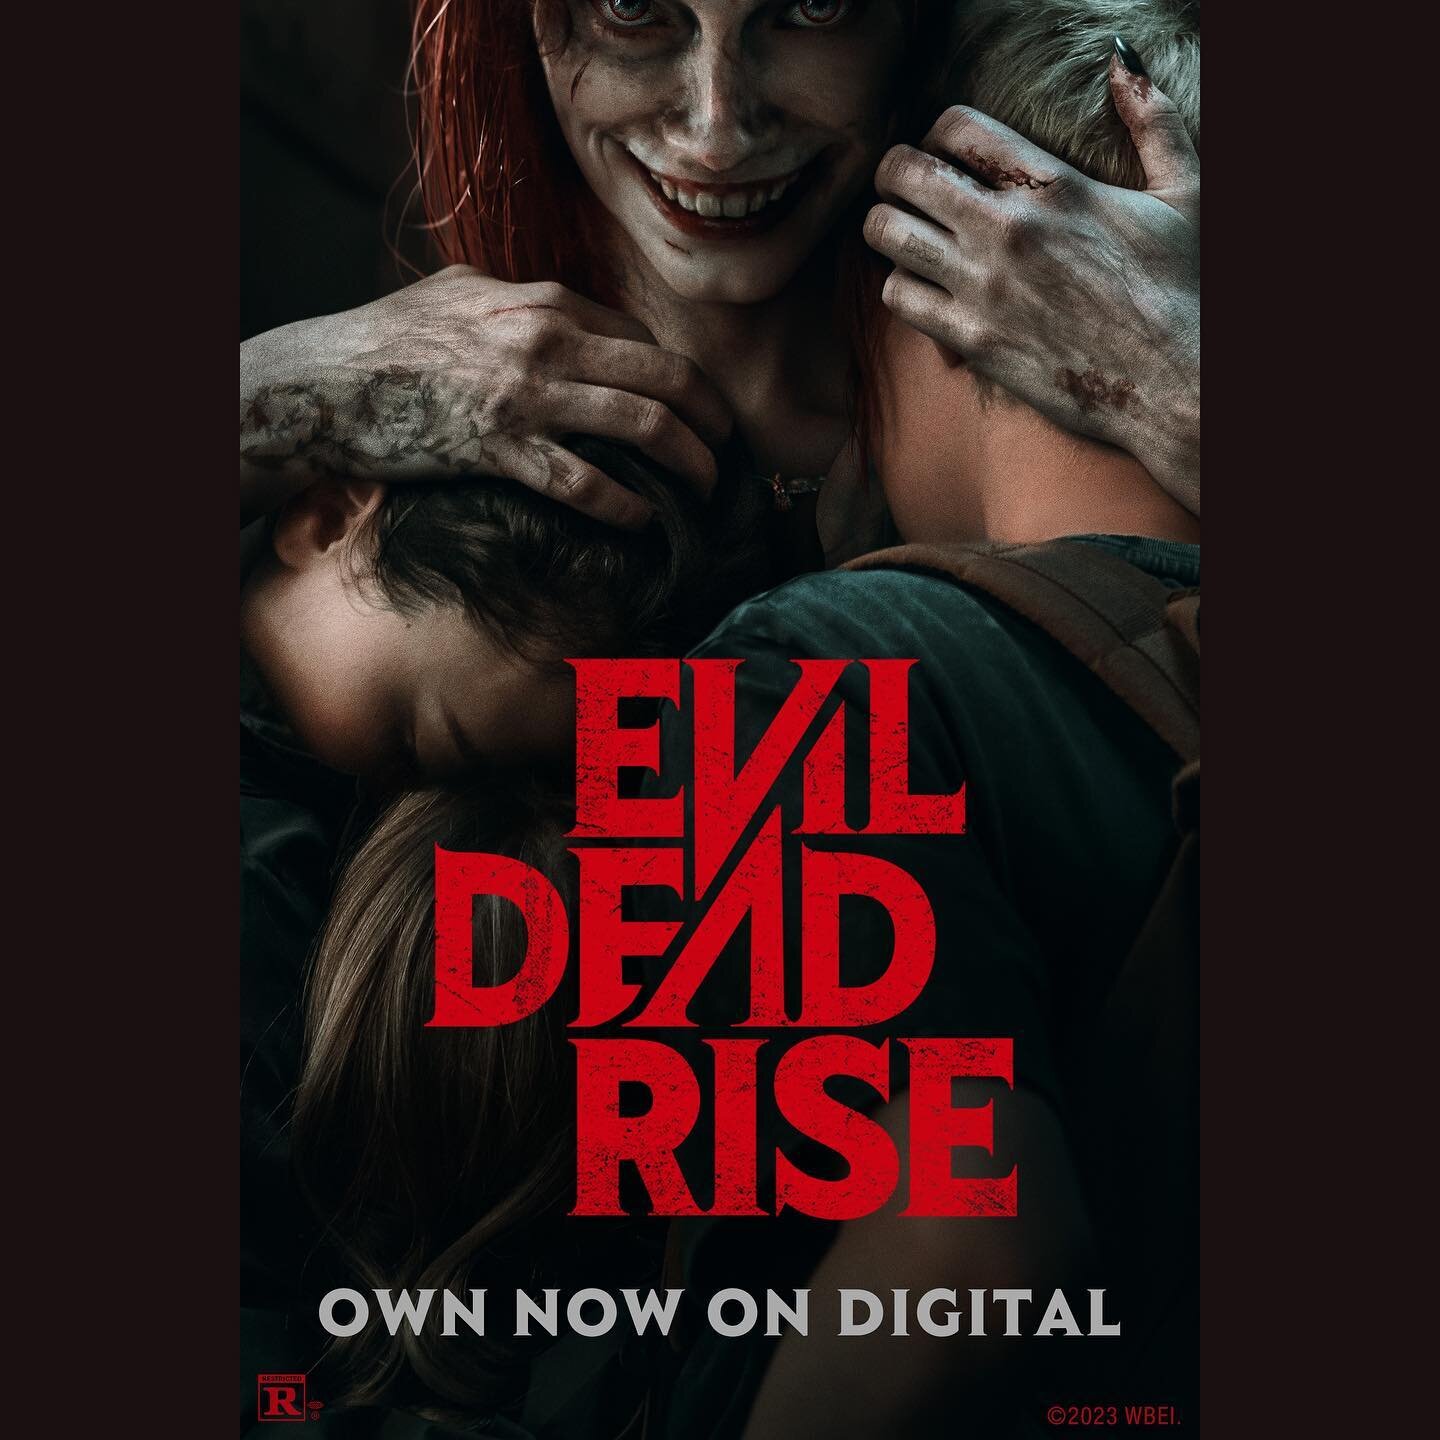 ***GIVEAWAY***

The Horror Show will be giving away 4 digital downloads of the NEW Evil Dead Rise film! To enter: email sean@ihatehorror.com with your favorite Evil Dead memory OR submit your own Deadite catchphrase/one liner. Bonus points for video 